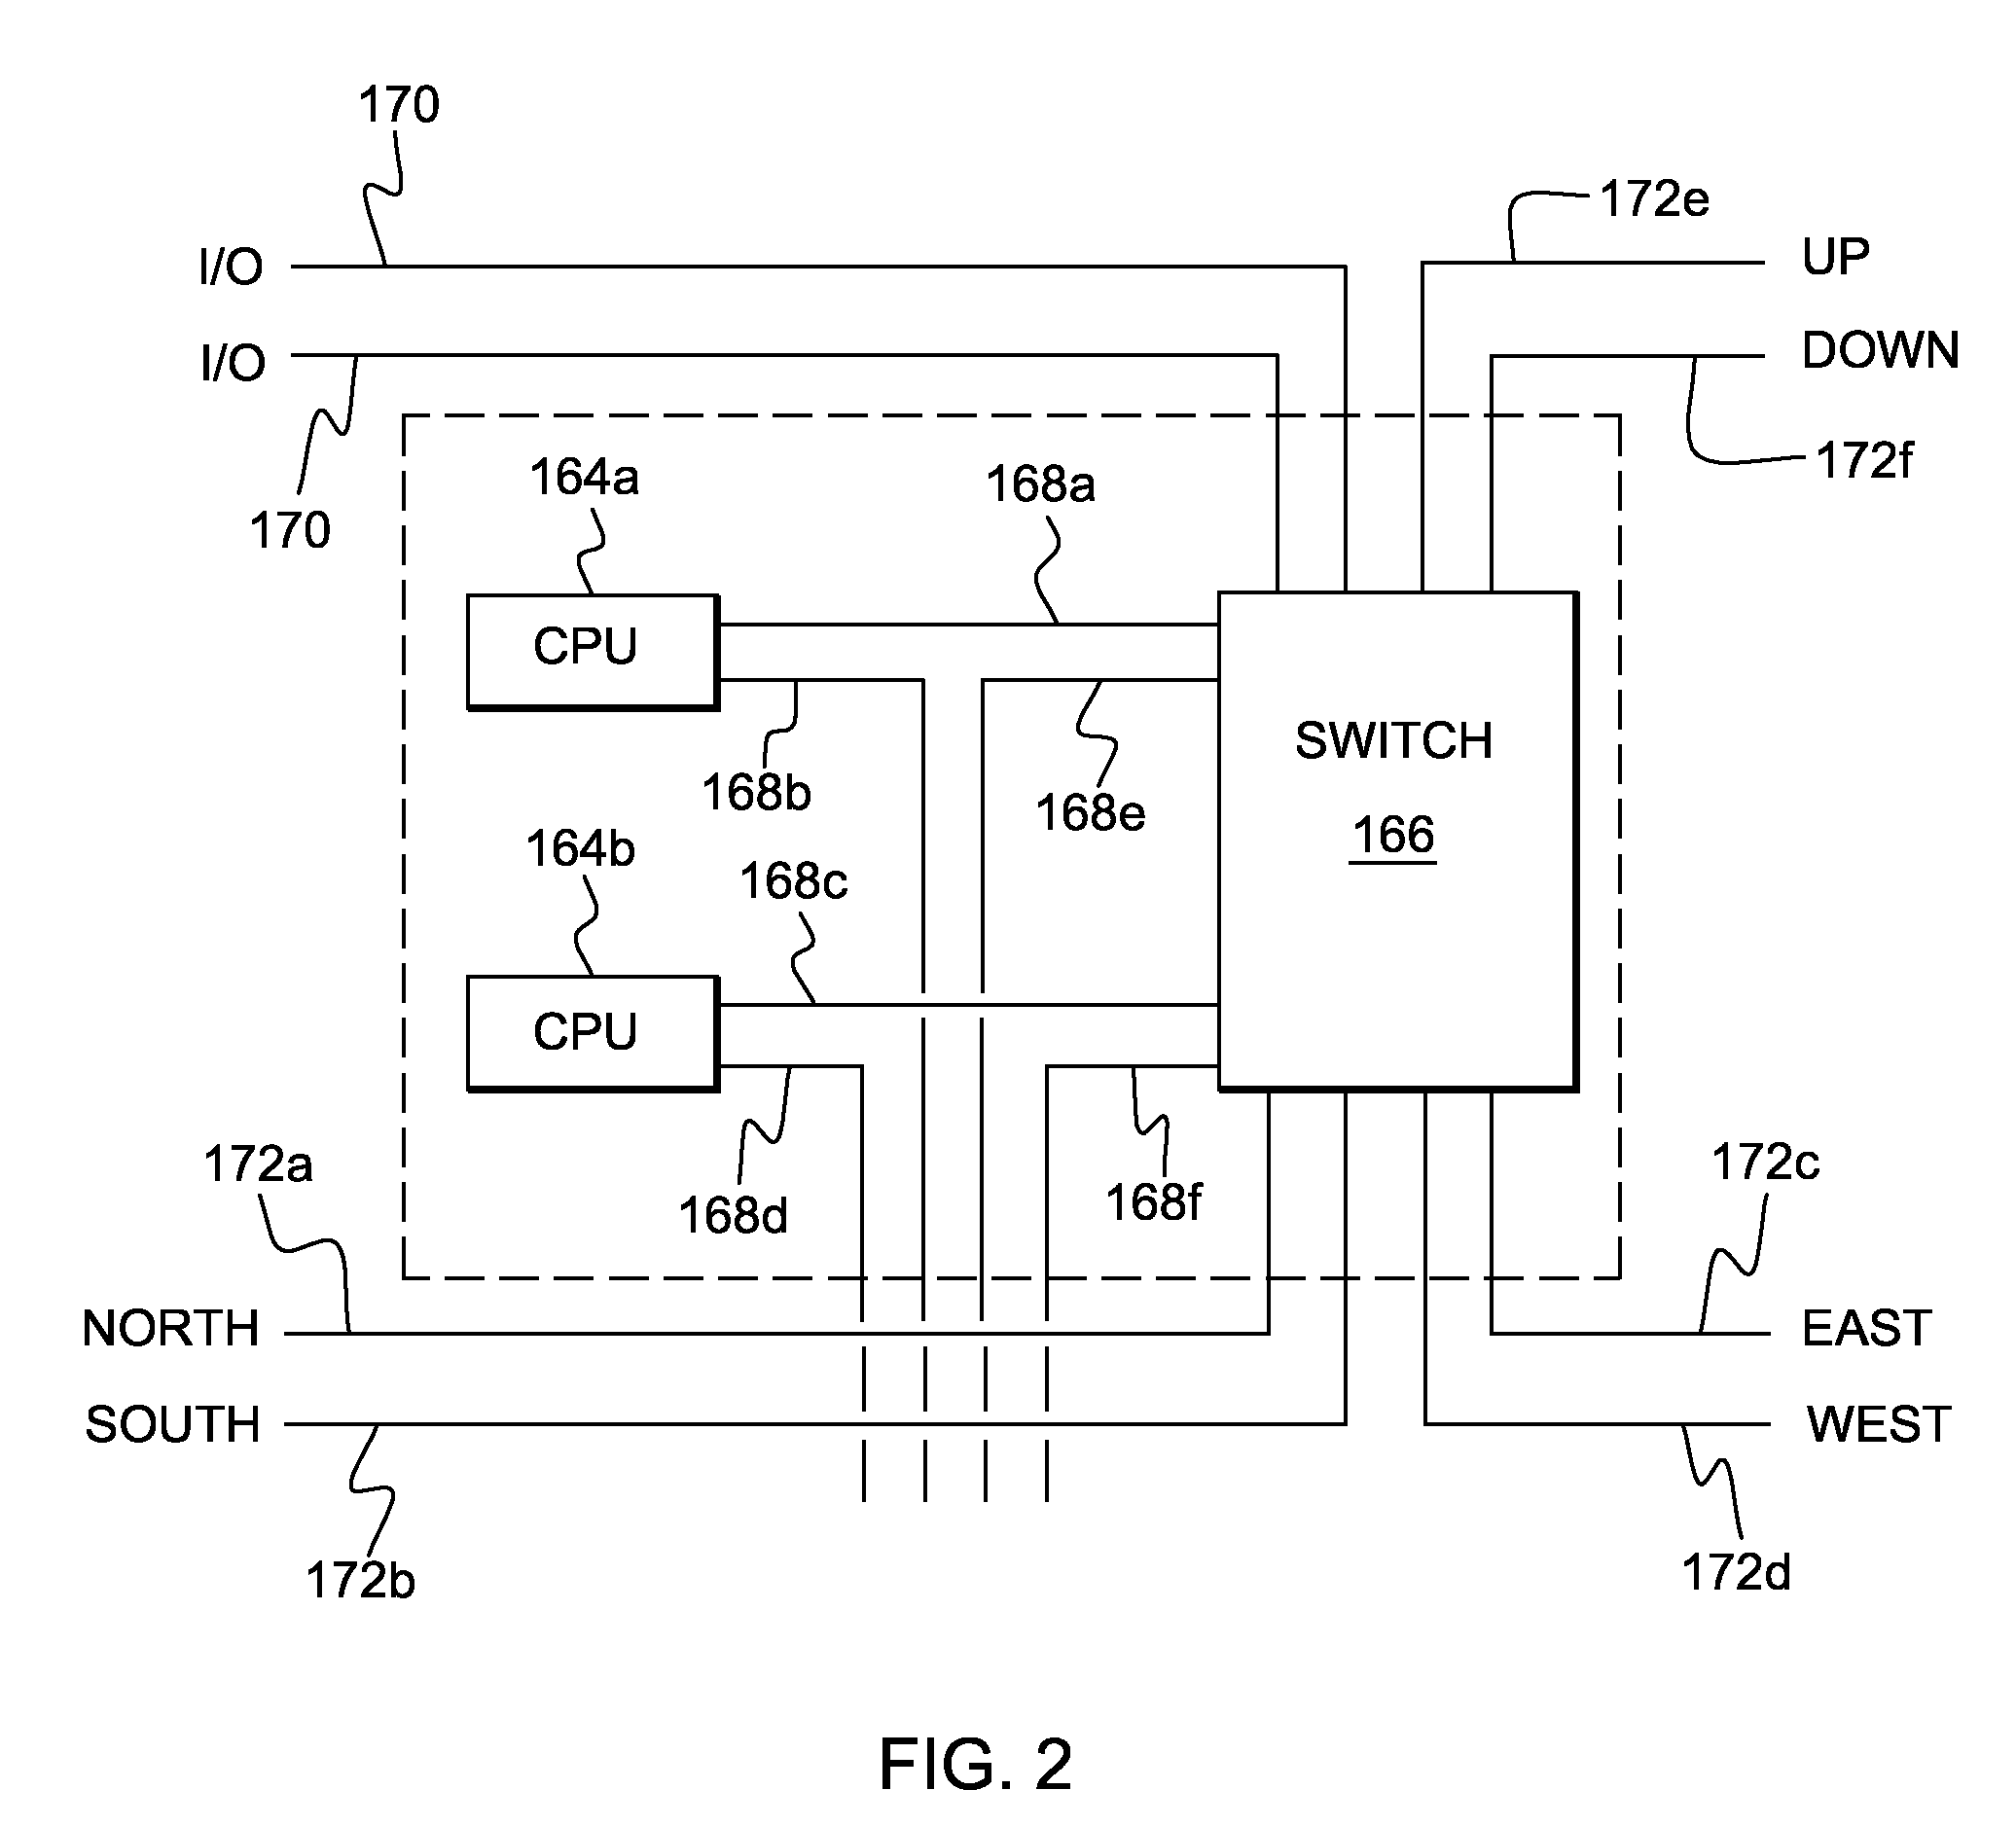 Methods and systems for migrating network resources to improve network utilization